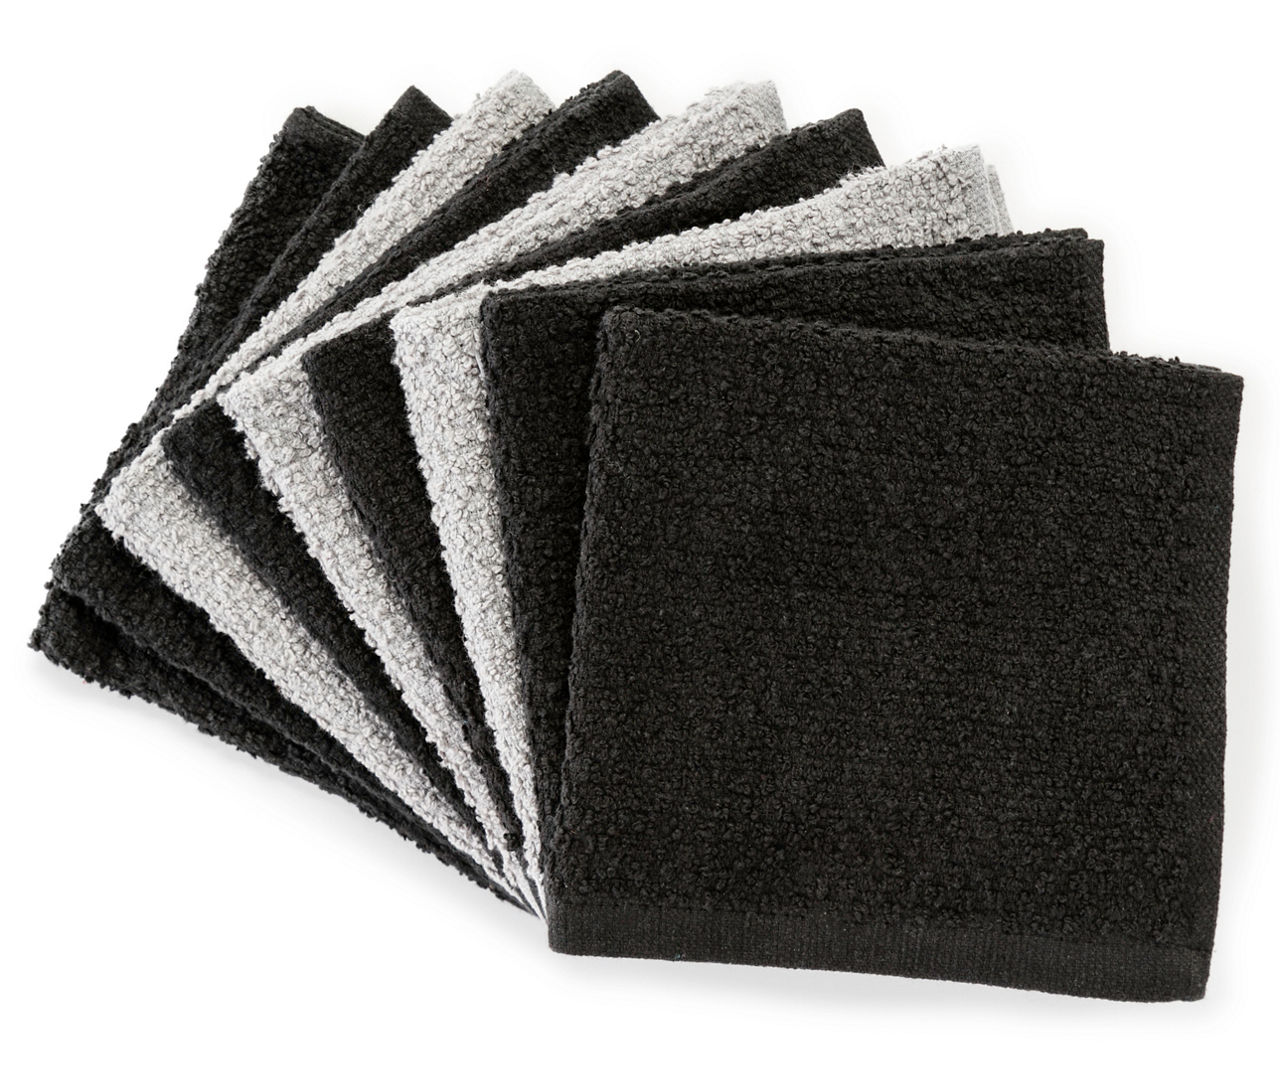 Just Home Black & Gray Wash Cloths, 9-Pack